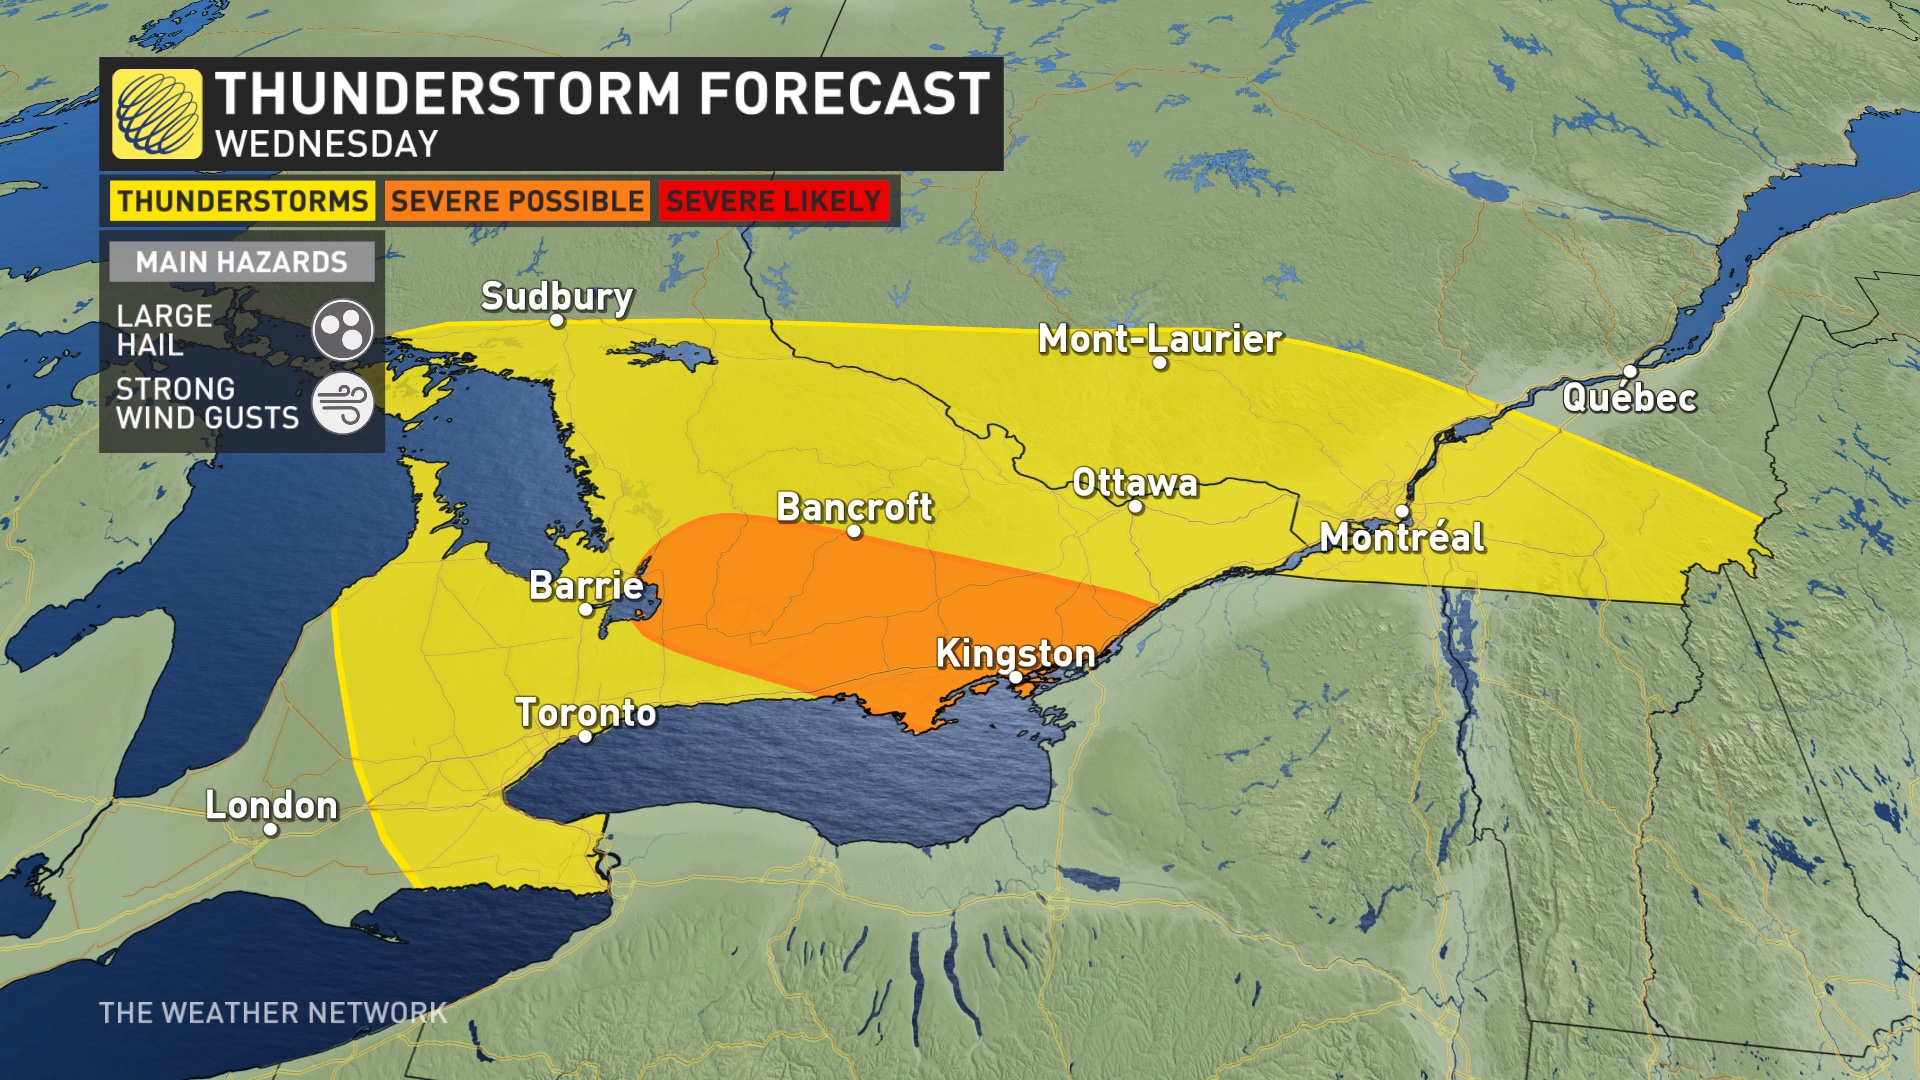 nocturnal storms could reach severe criteria in parts of ontario south